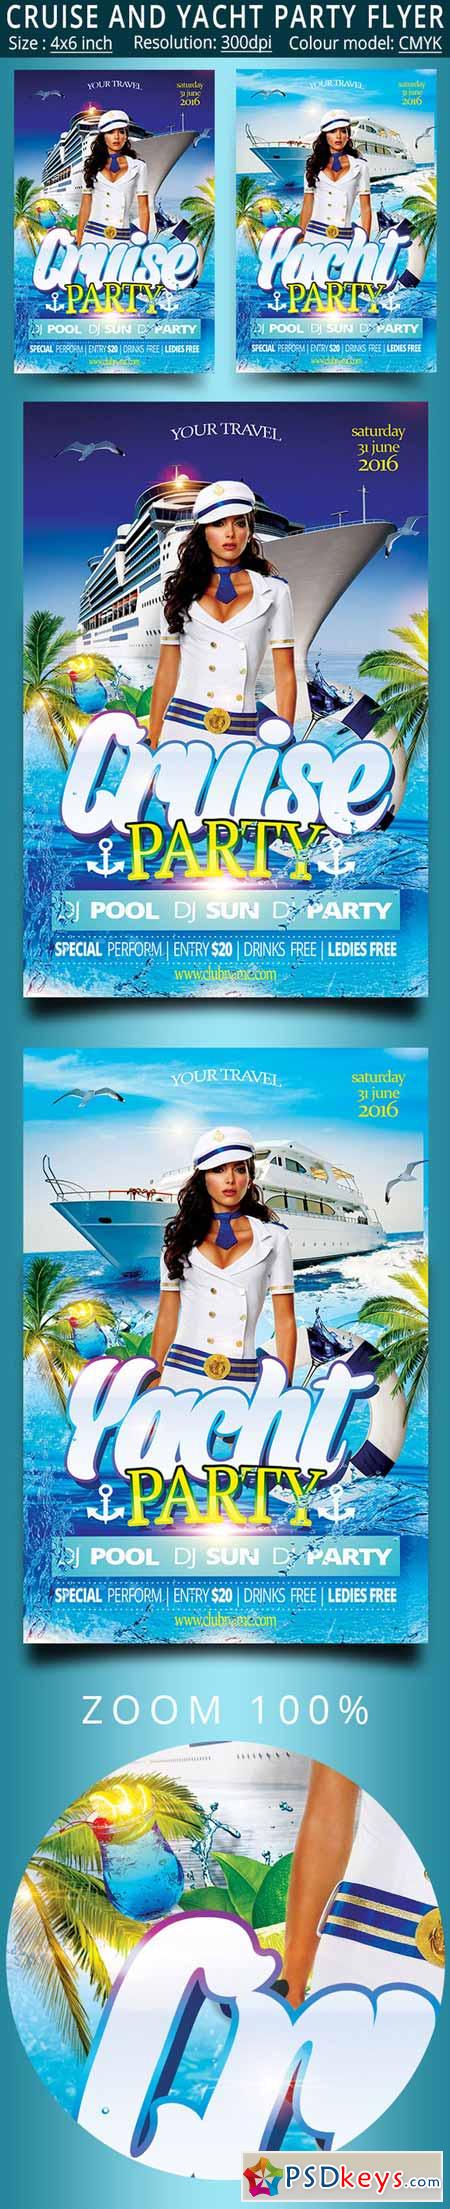 Cruise And Yacht Party Flyer 577920